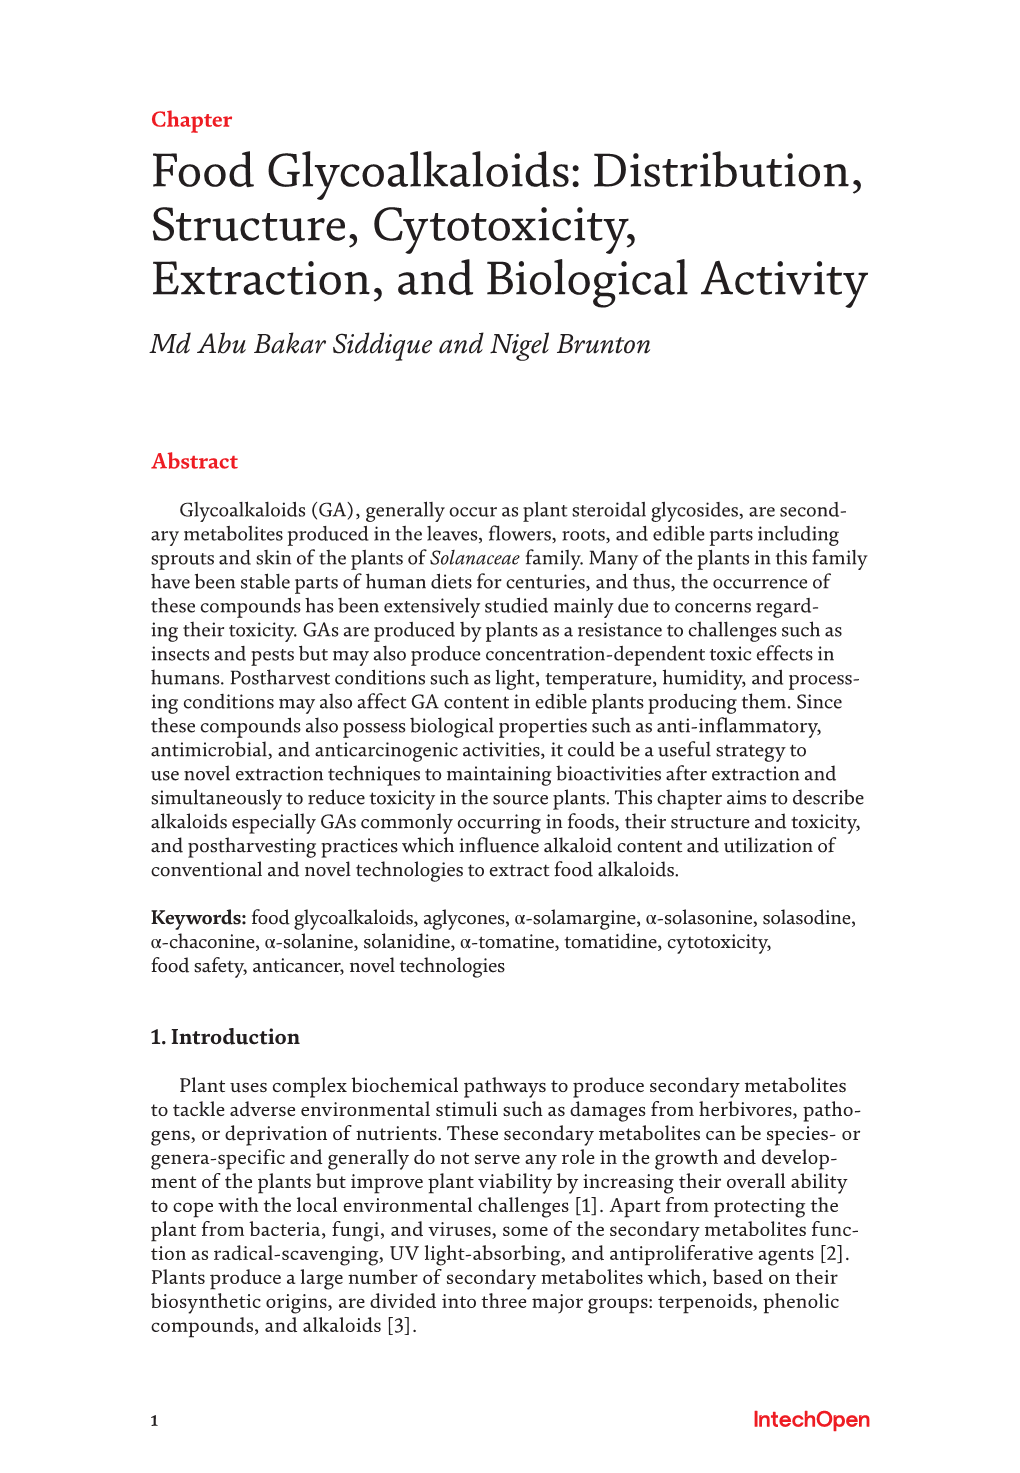 Distribution, Structure, Cytotoxicity, Extraction, and Biological Activity Md Abu Bakar Siddique and Nigel Brunton